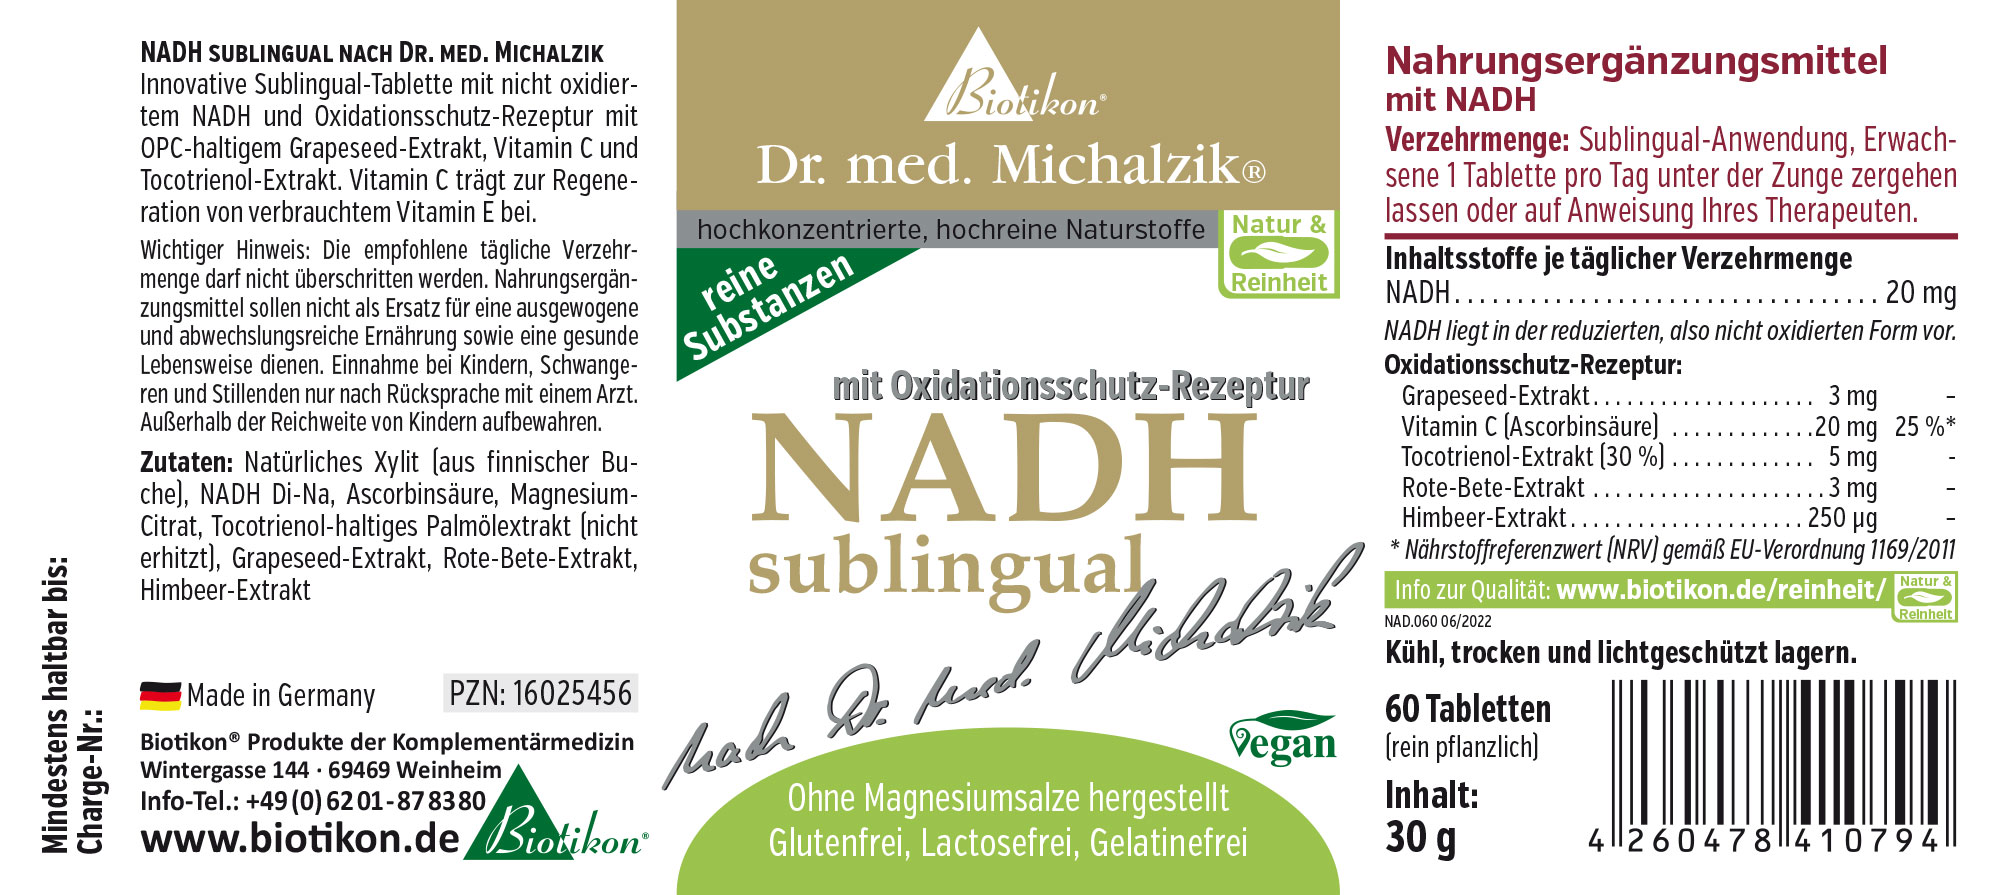 NADH sublinguale